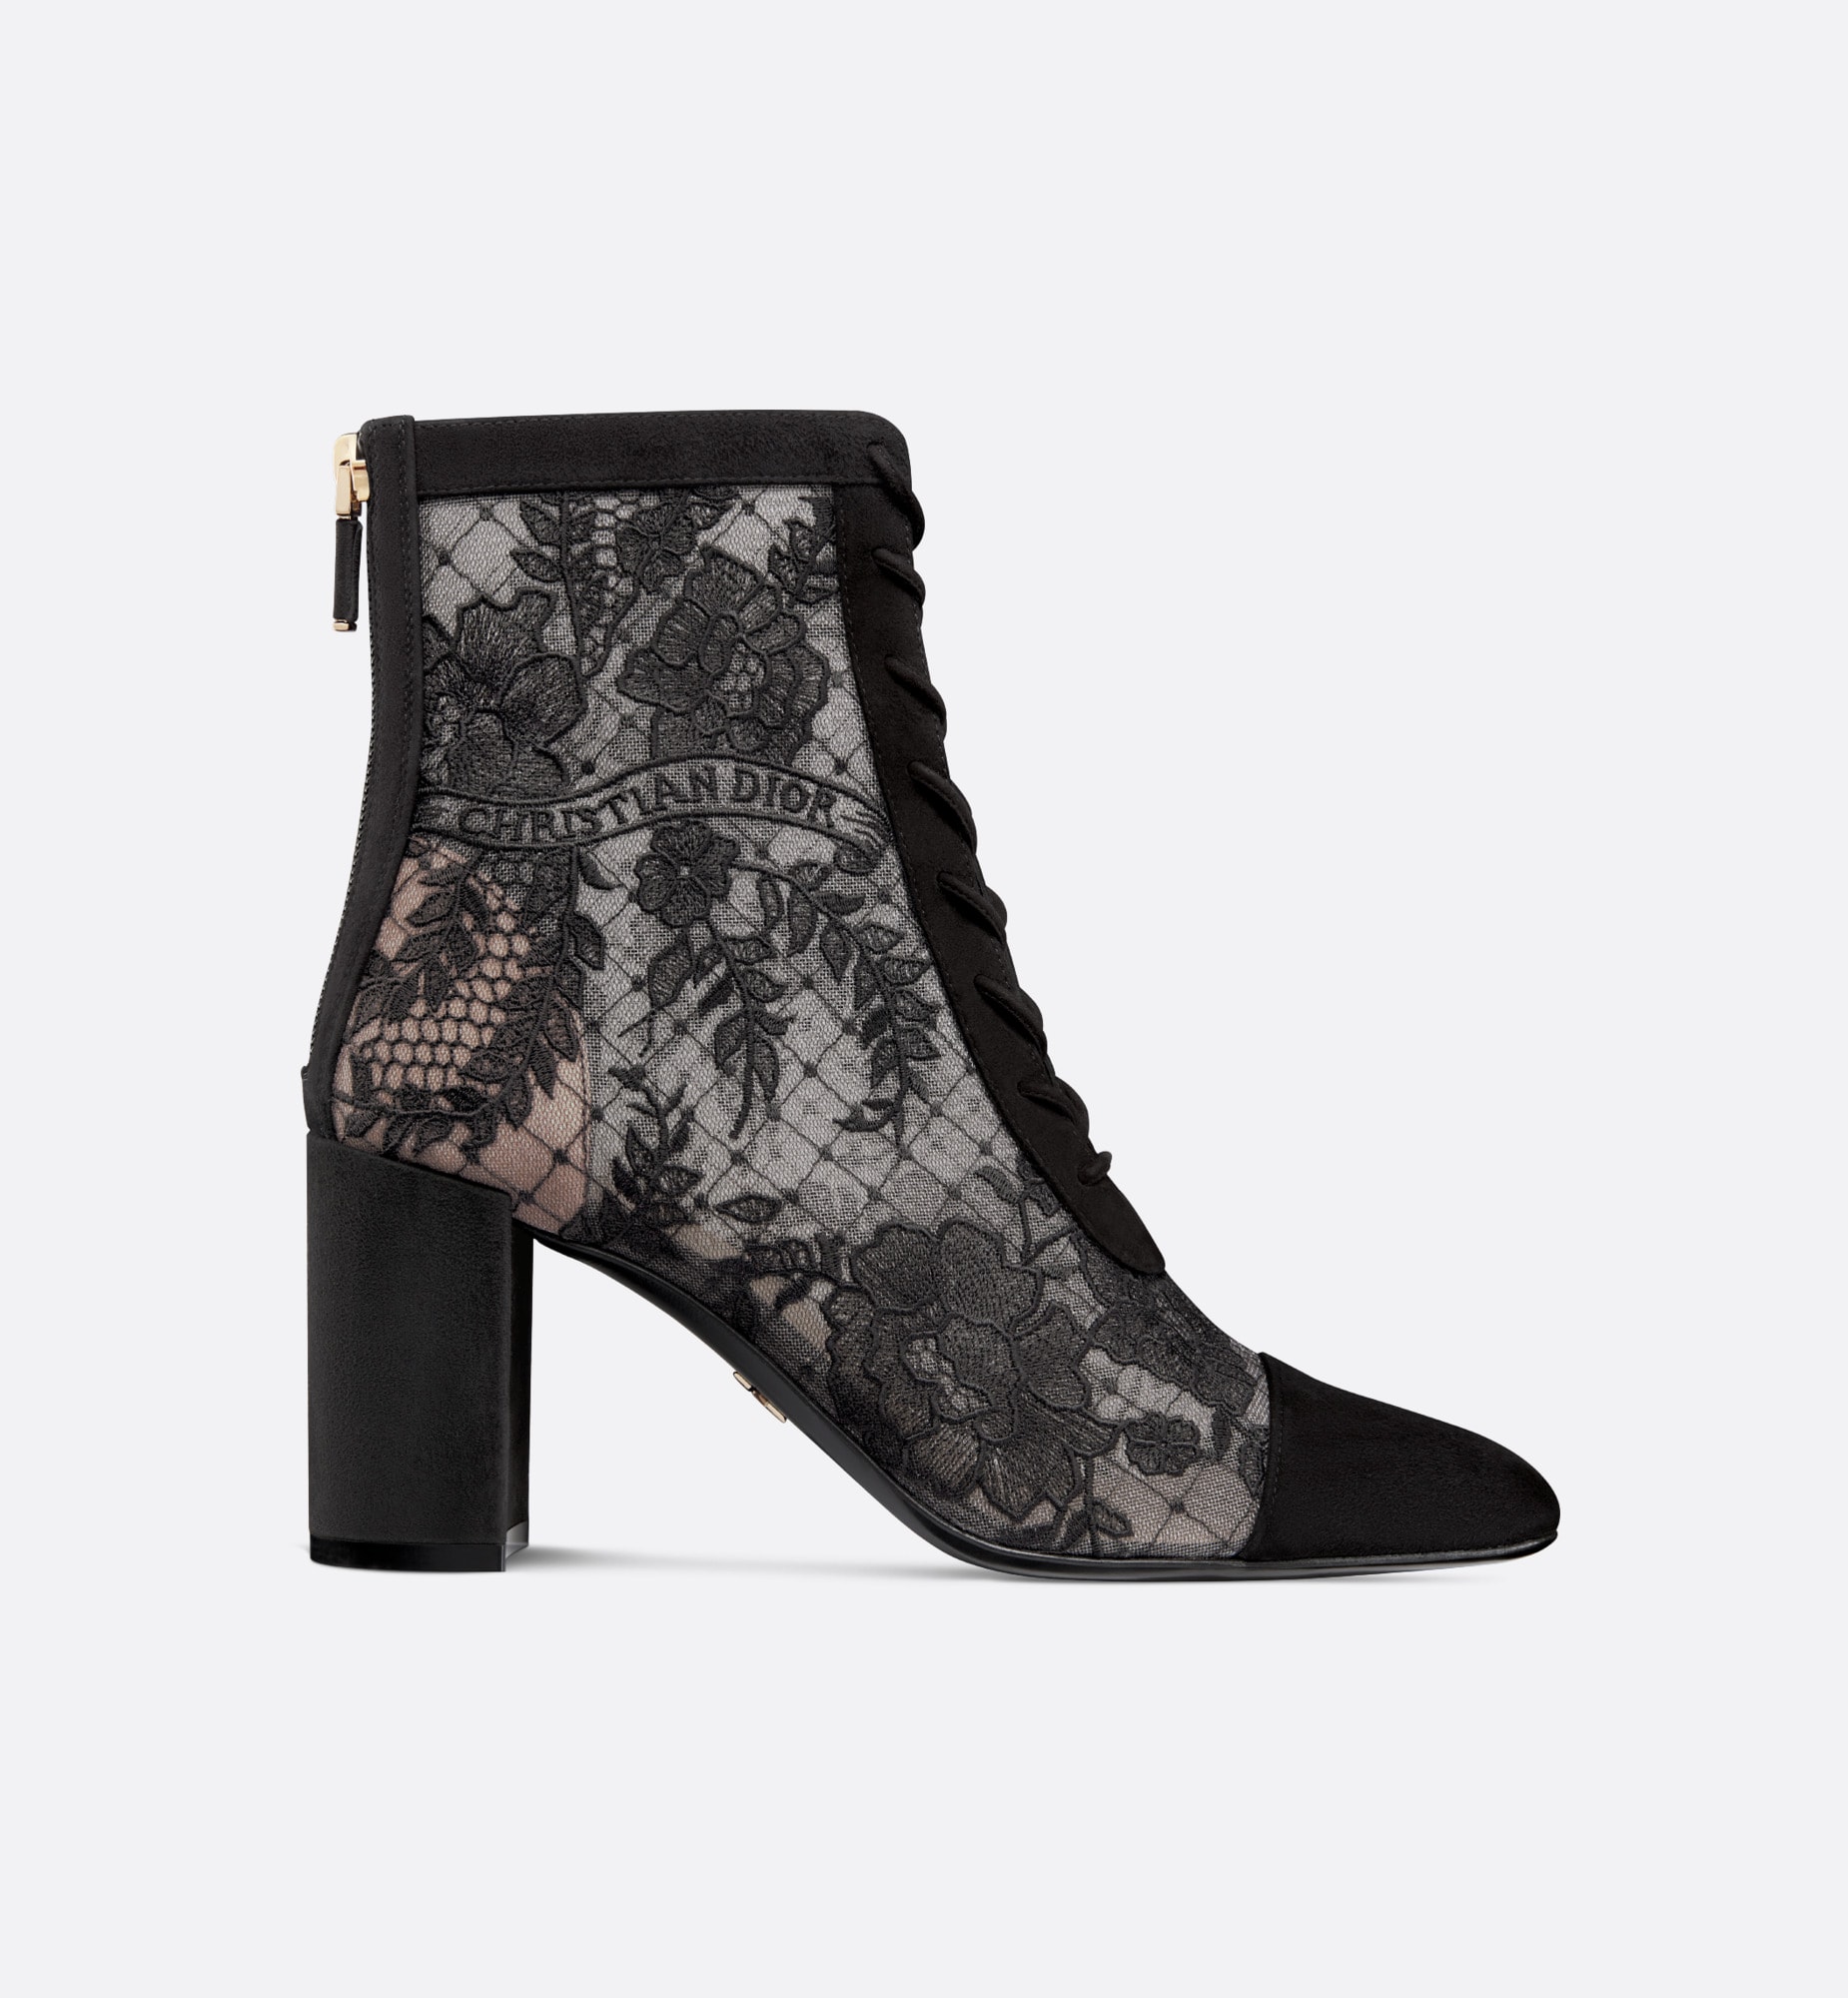 Dior naughtily d ankle boot in black